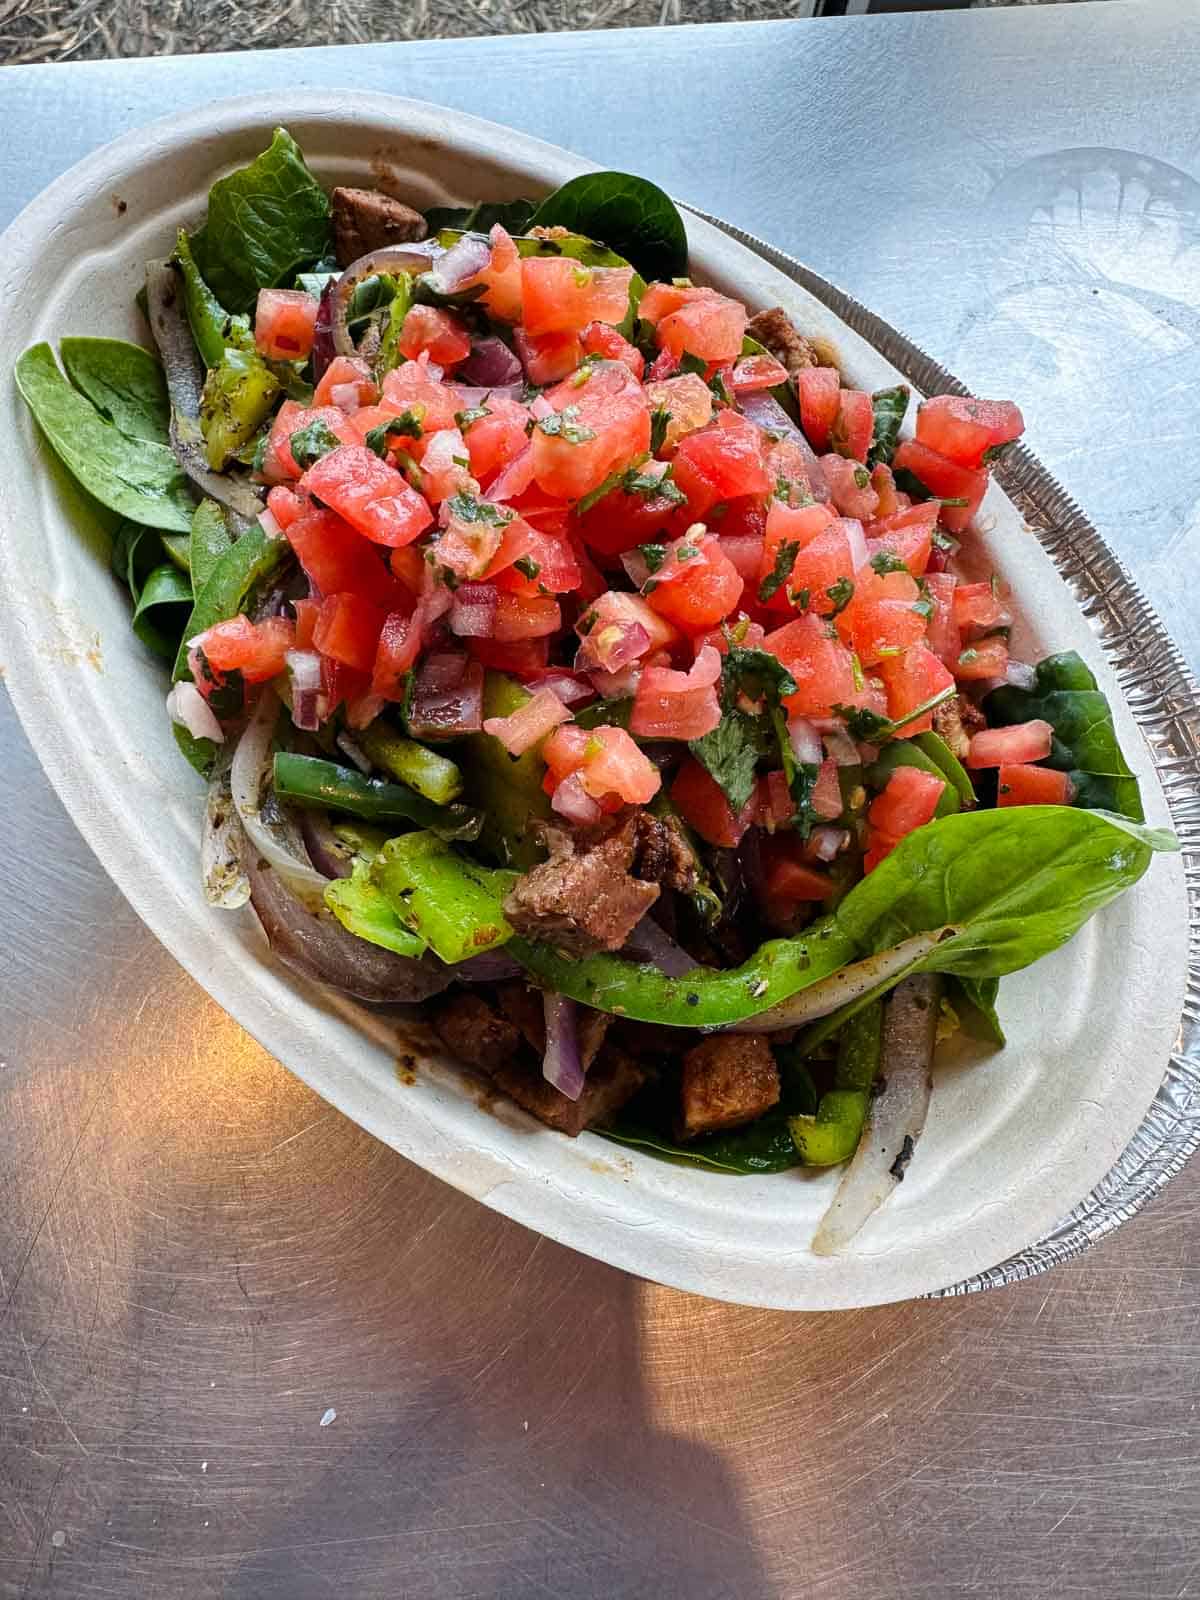 chipotle salad with tomato salsa and steak